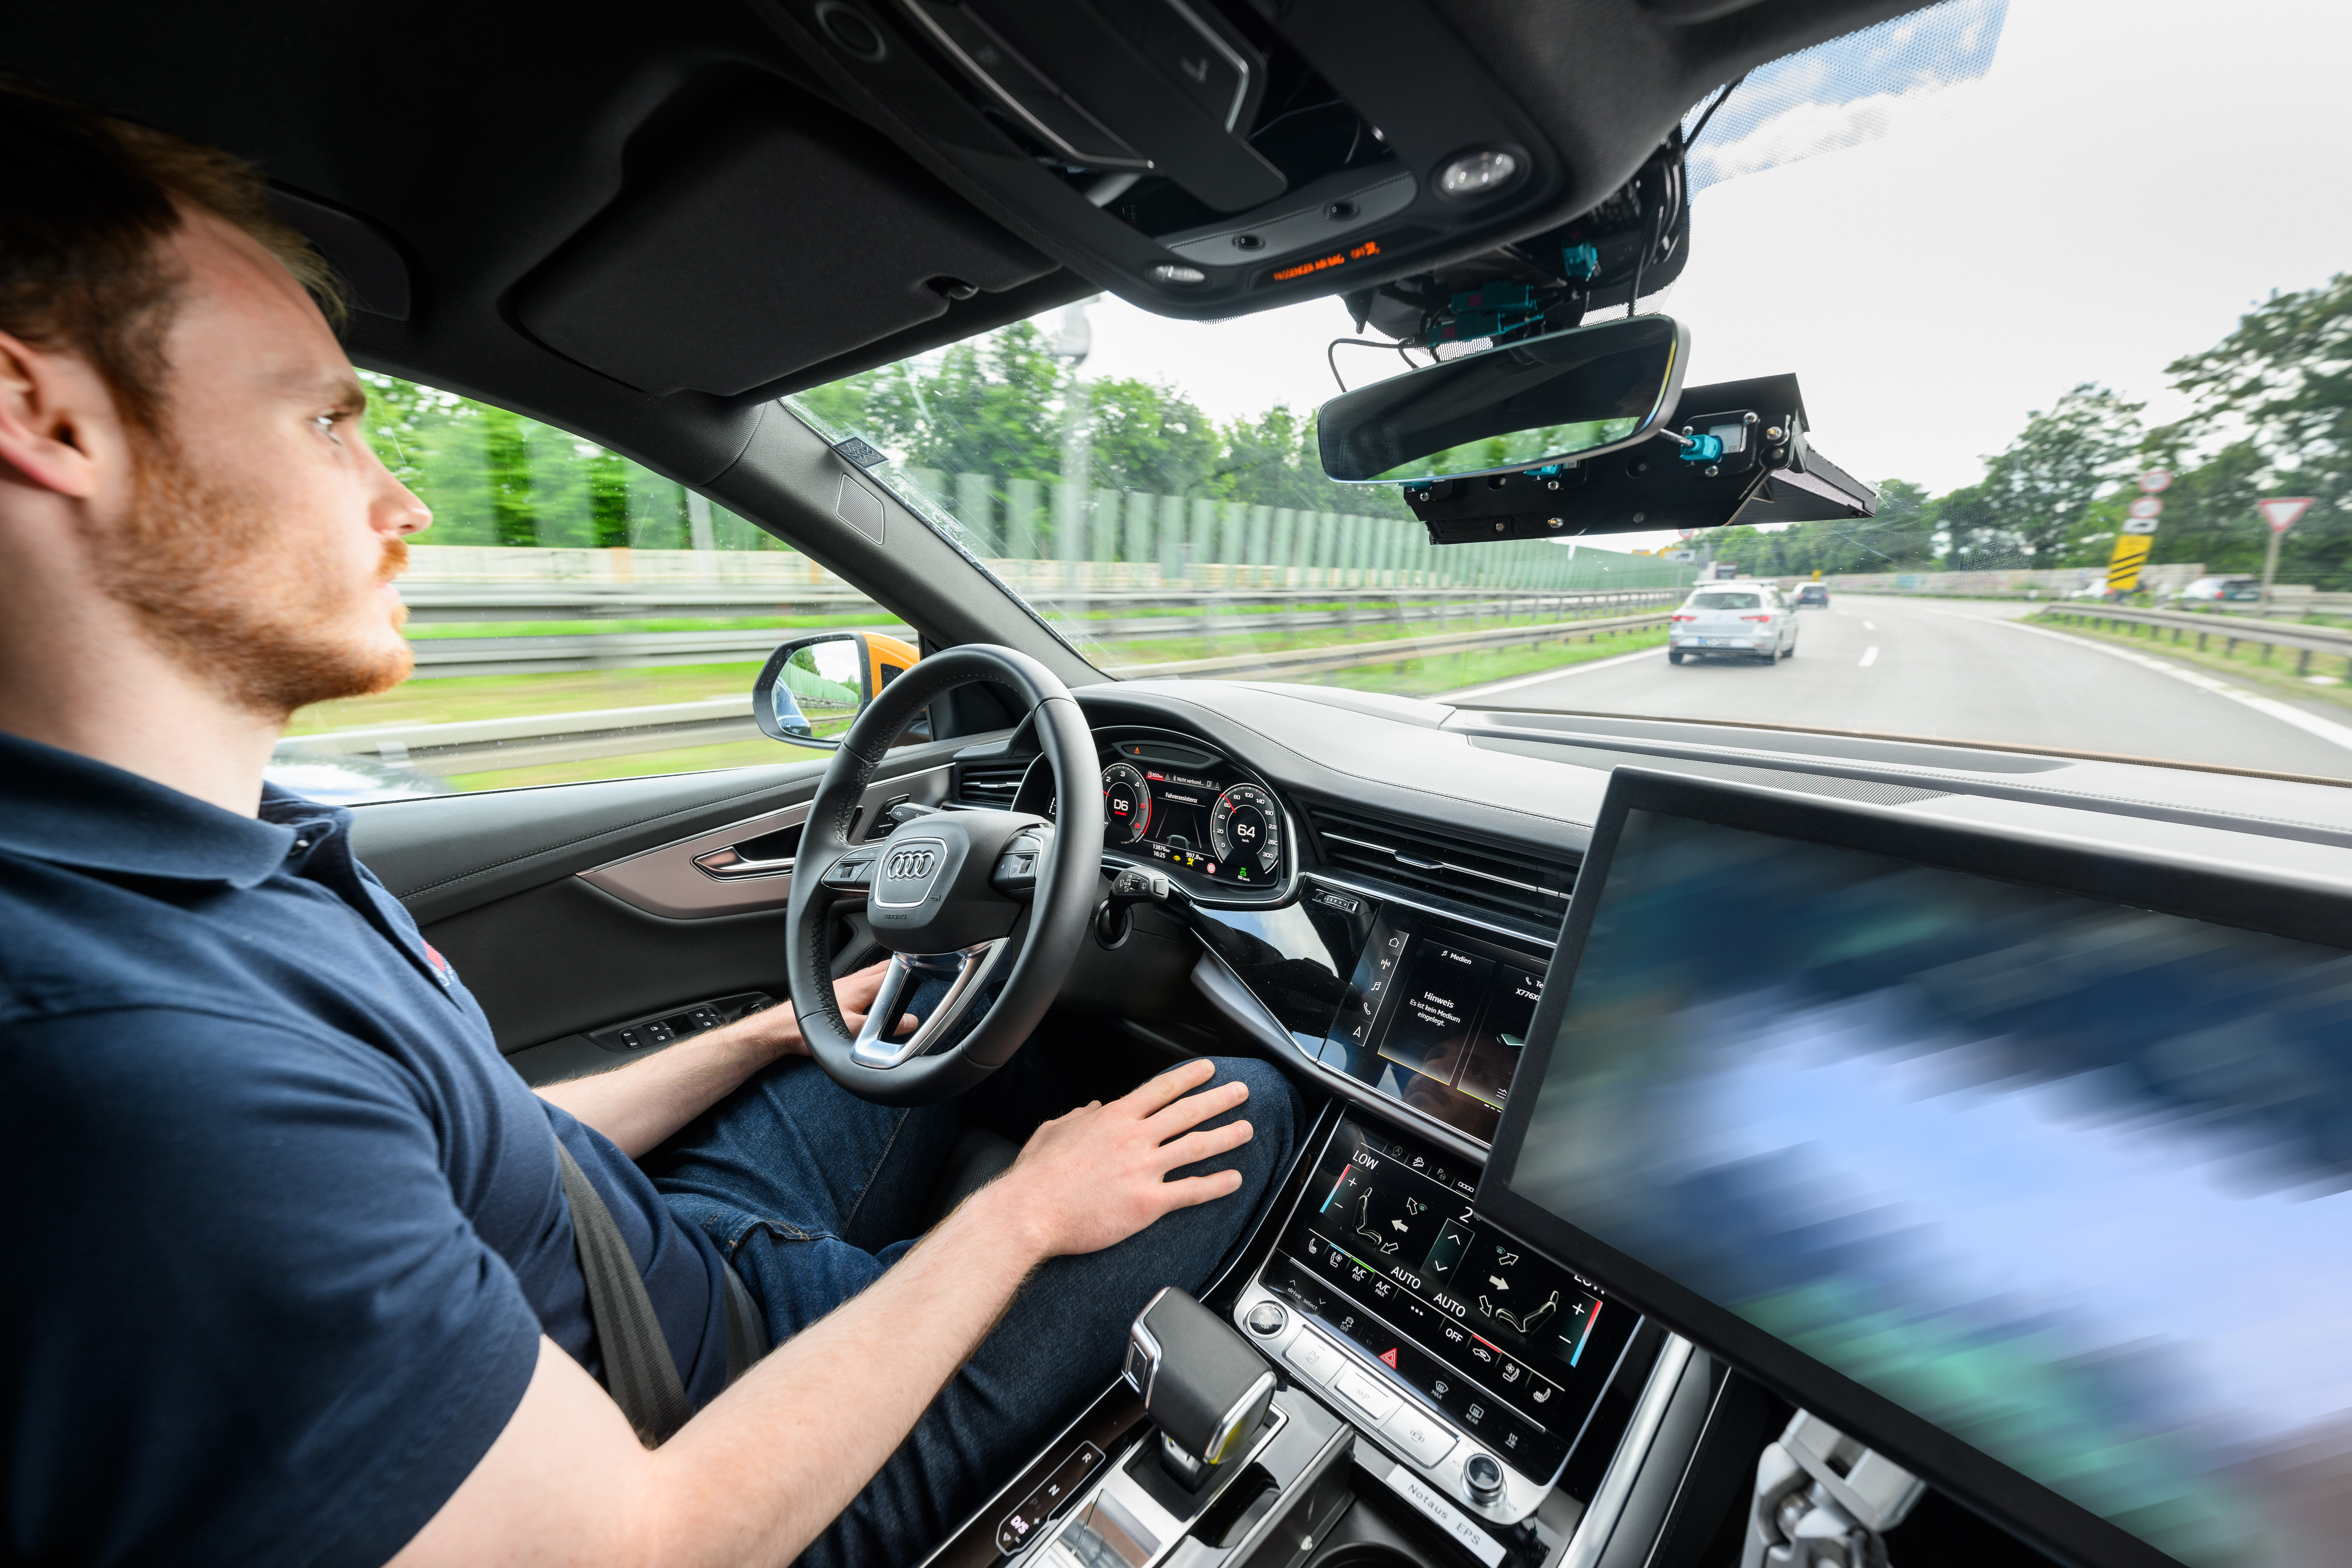 Automated Driving Alliance: From to road faster with data-driven development